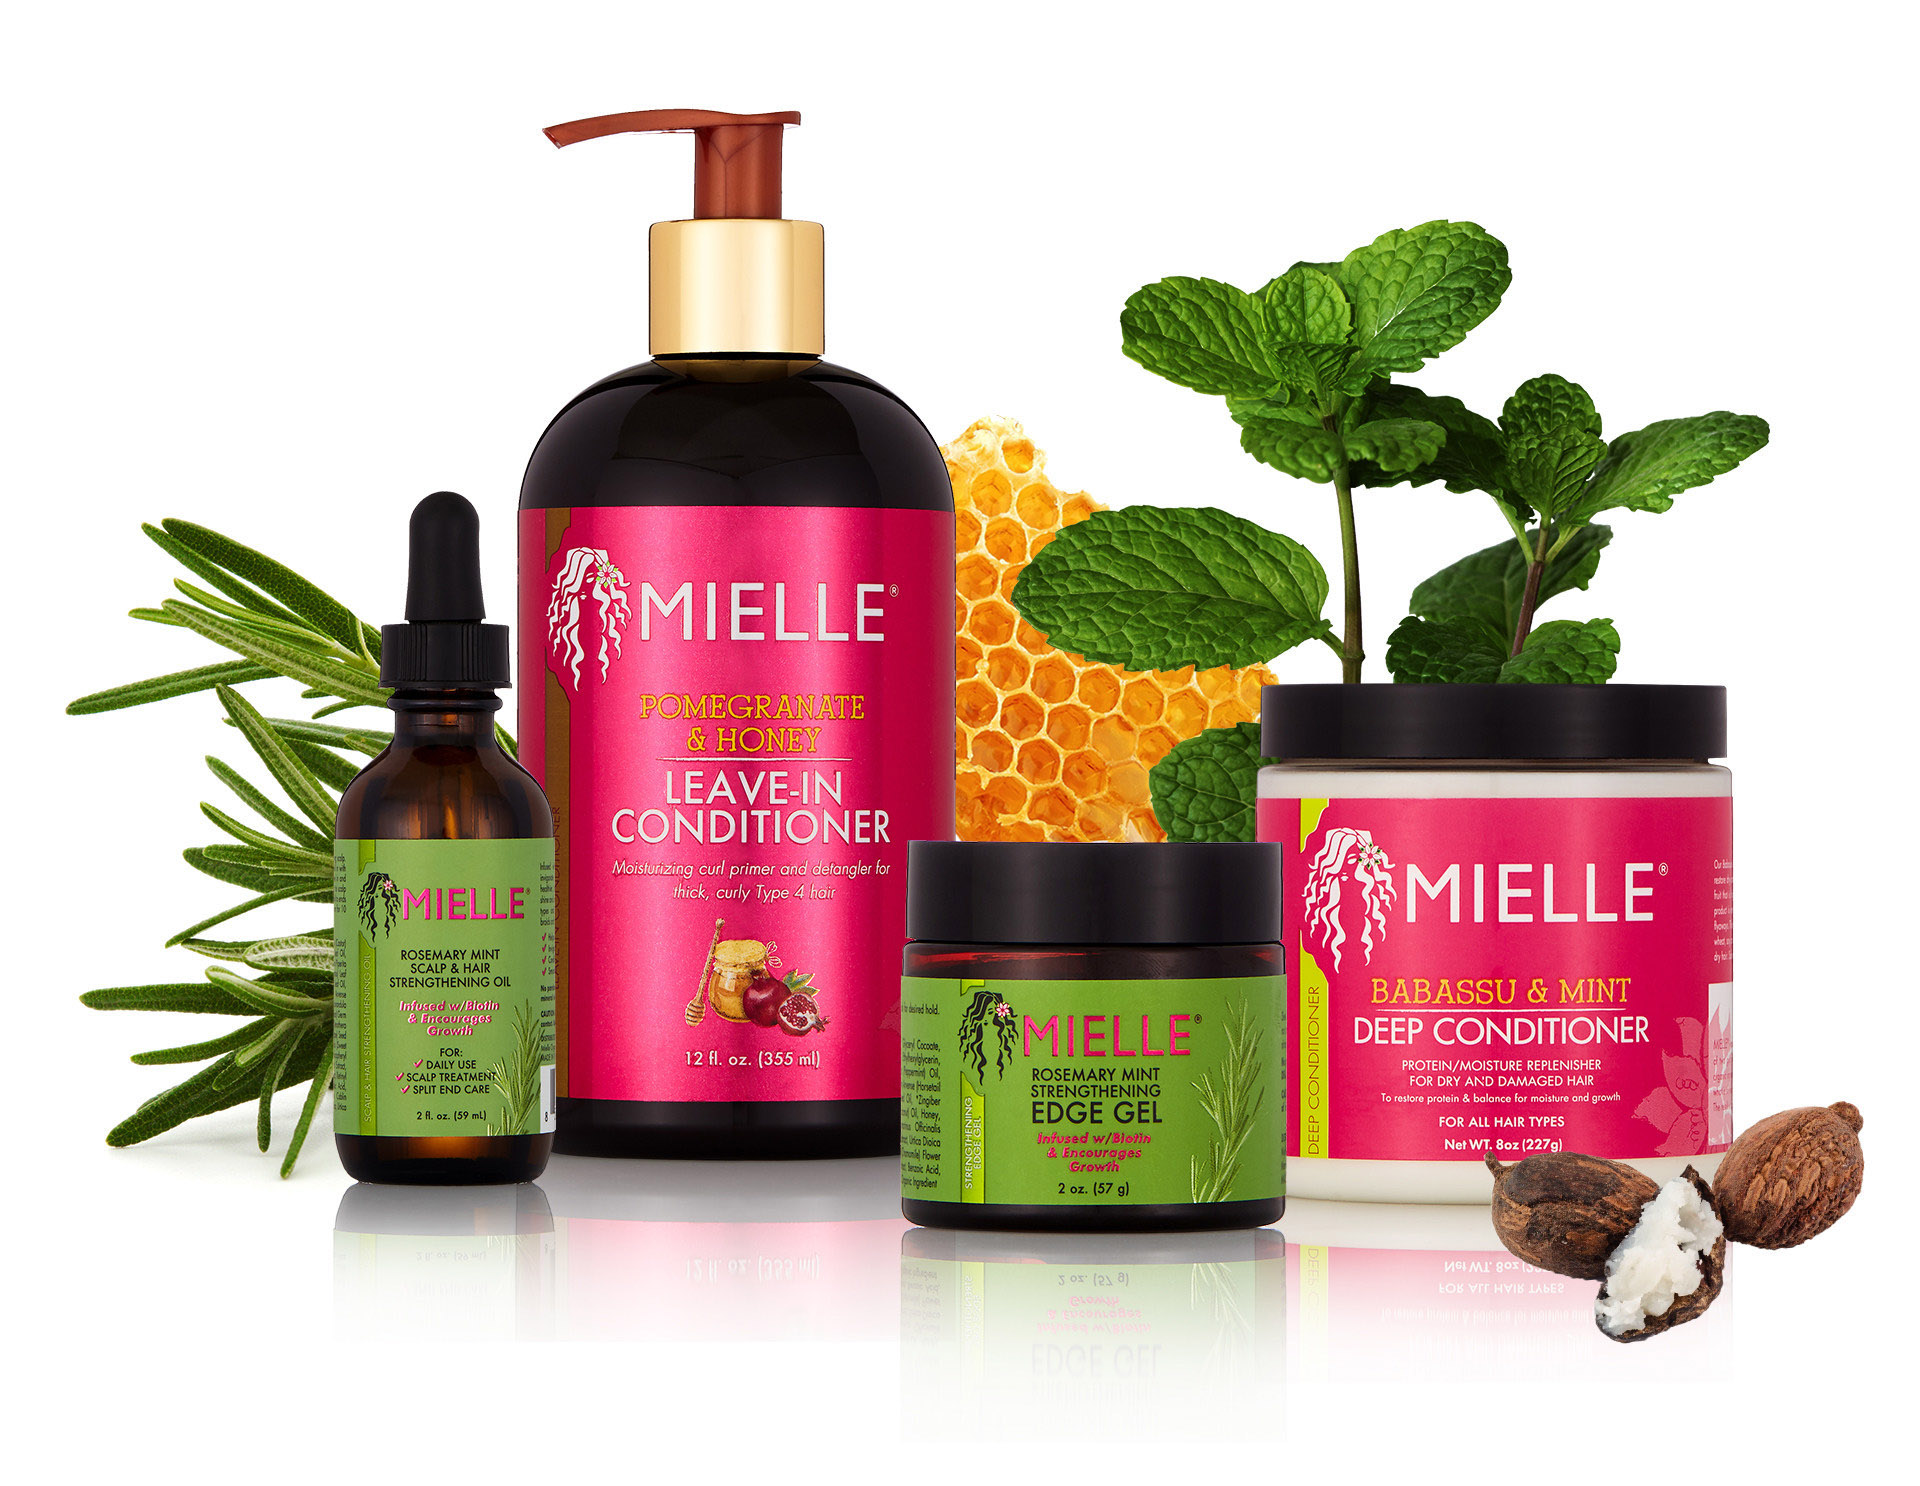 P&G Buys Textured-Hair Brand Mielle, Focusing on Black Women - Bloomberg